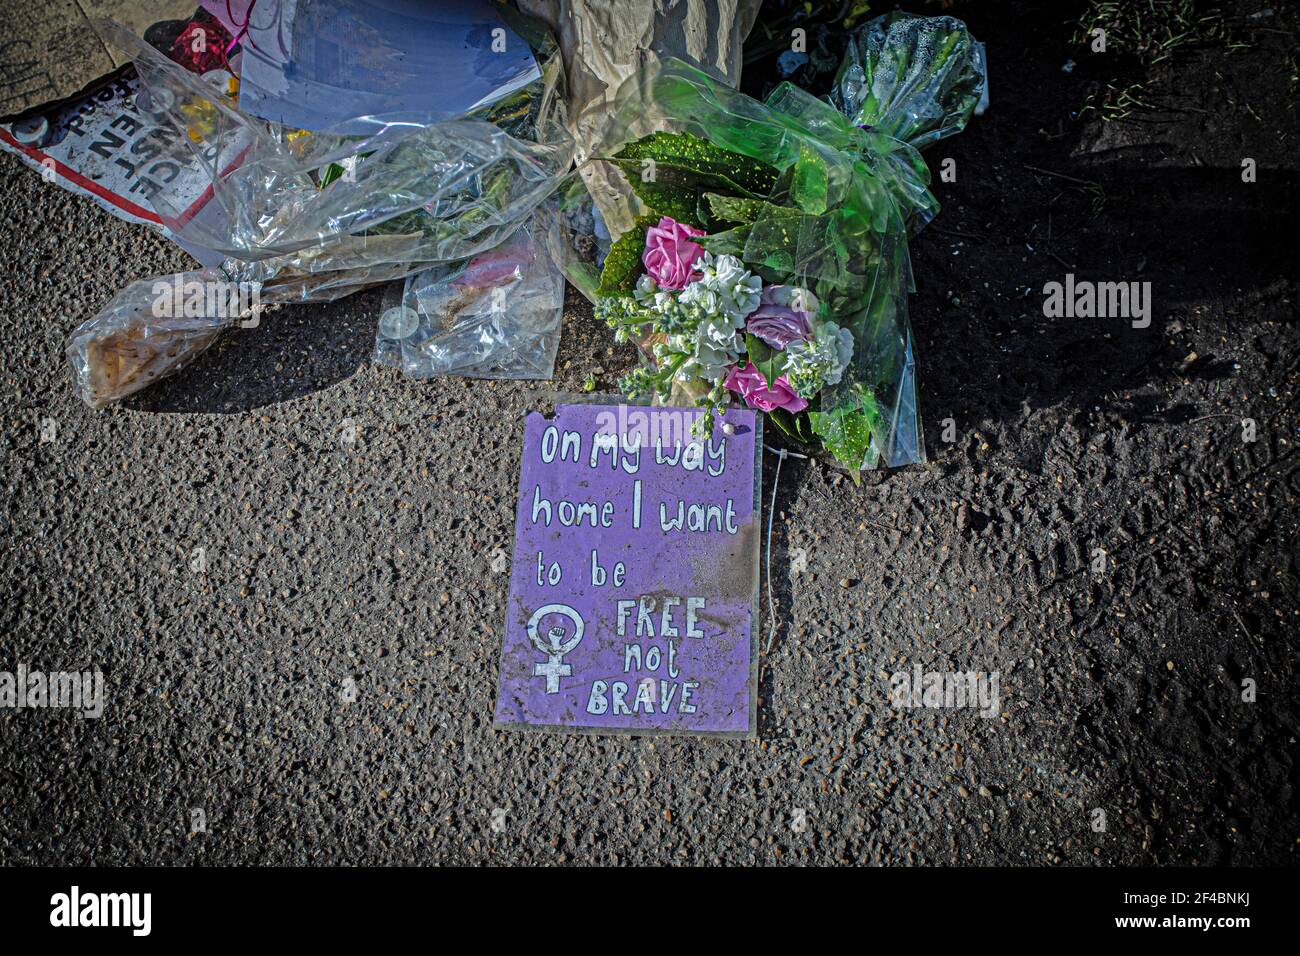 LONDON, ENGLAND - MARCH 19: Sign and Flowers in Memory of Sarah Everard on Clapham Common, London UK Stock Photo